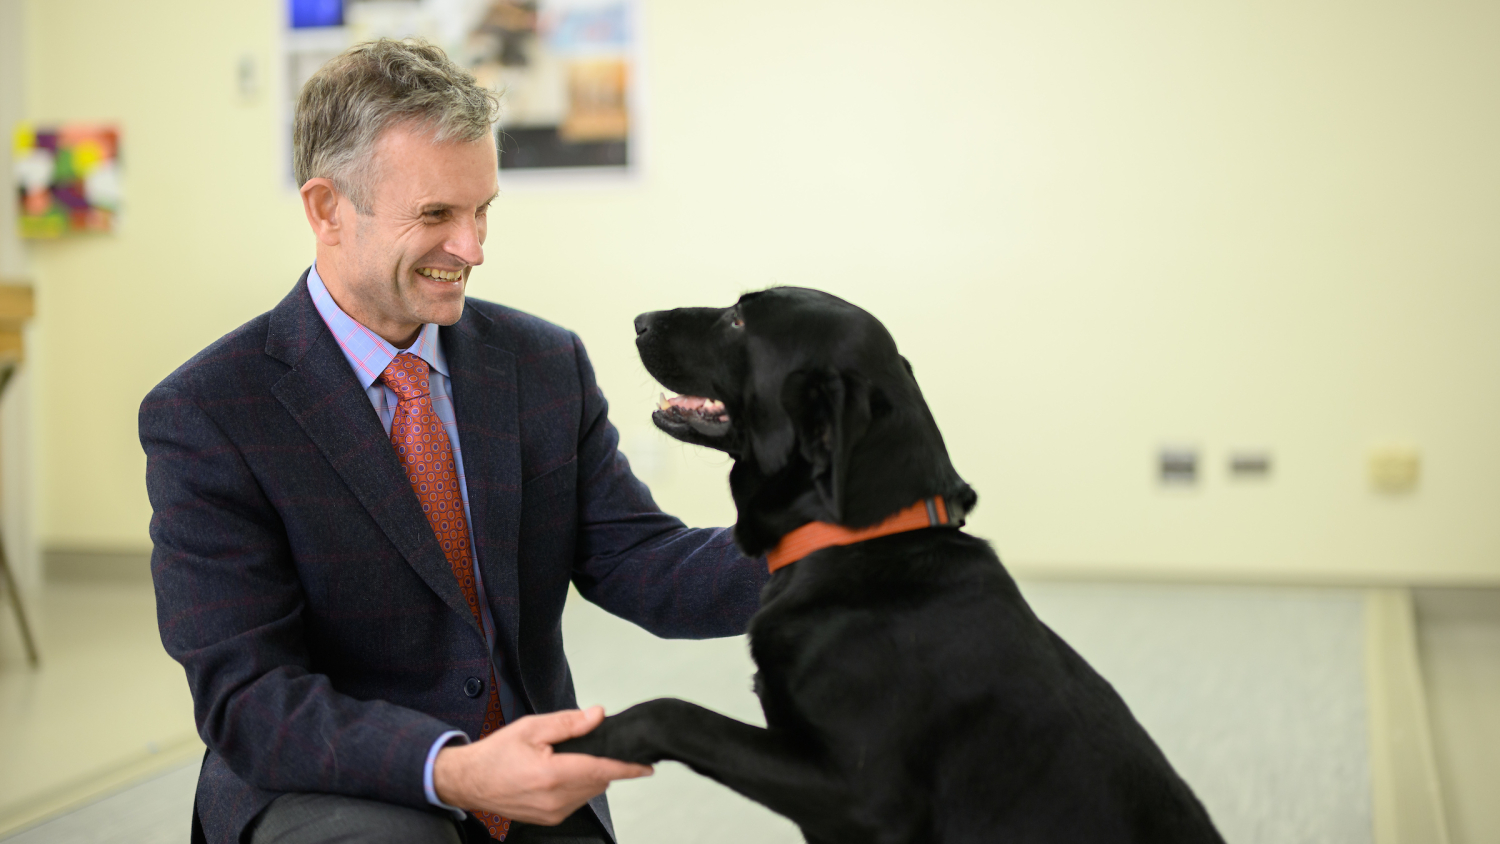 Dr. Lascelles shakes hands with a happy dog